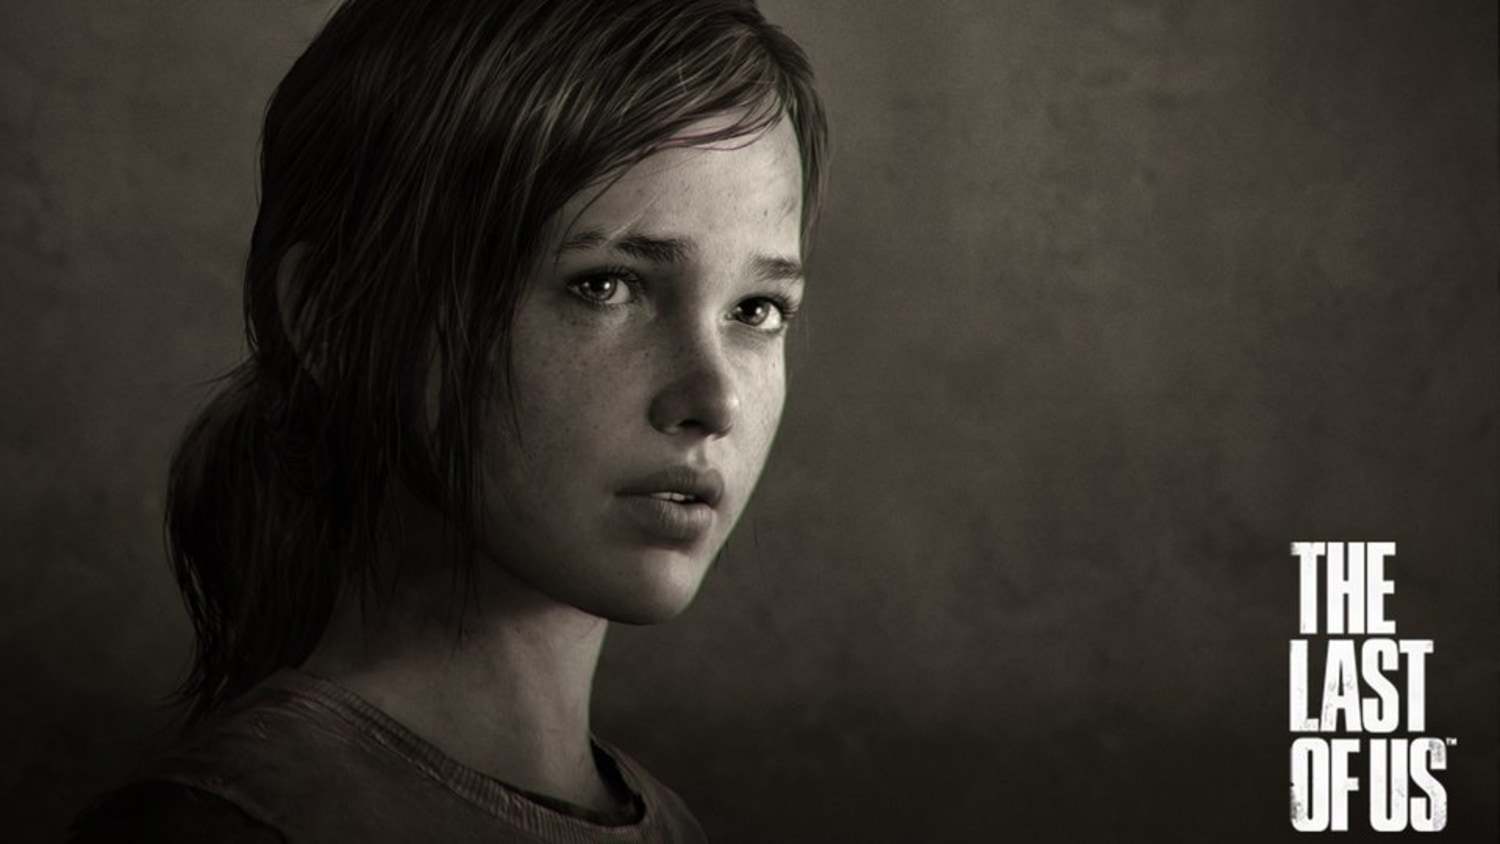 Ellen Page thinks Naughty Dog “ripped off” her likeness for The